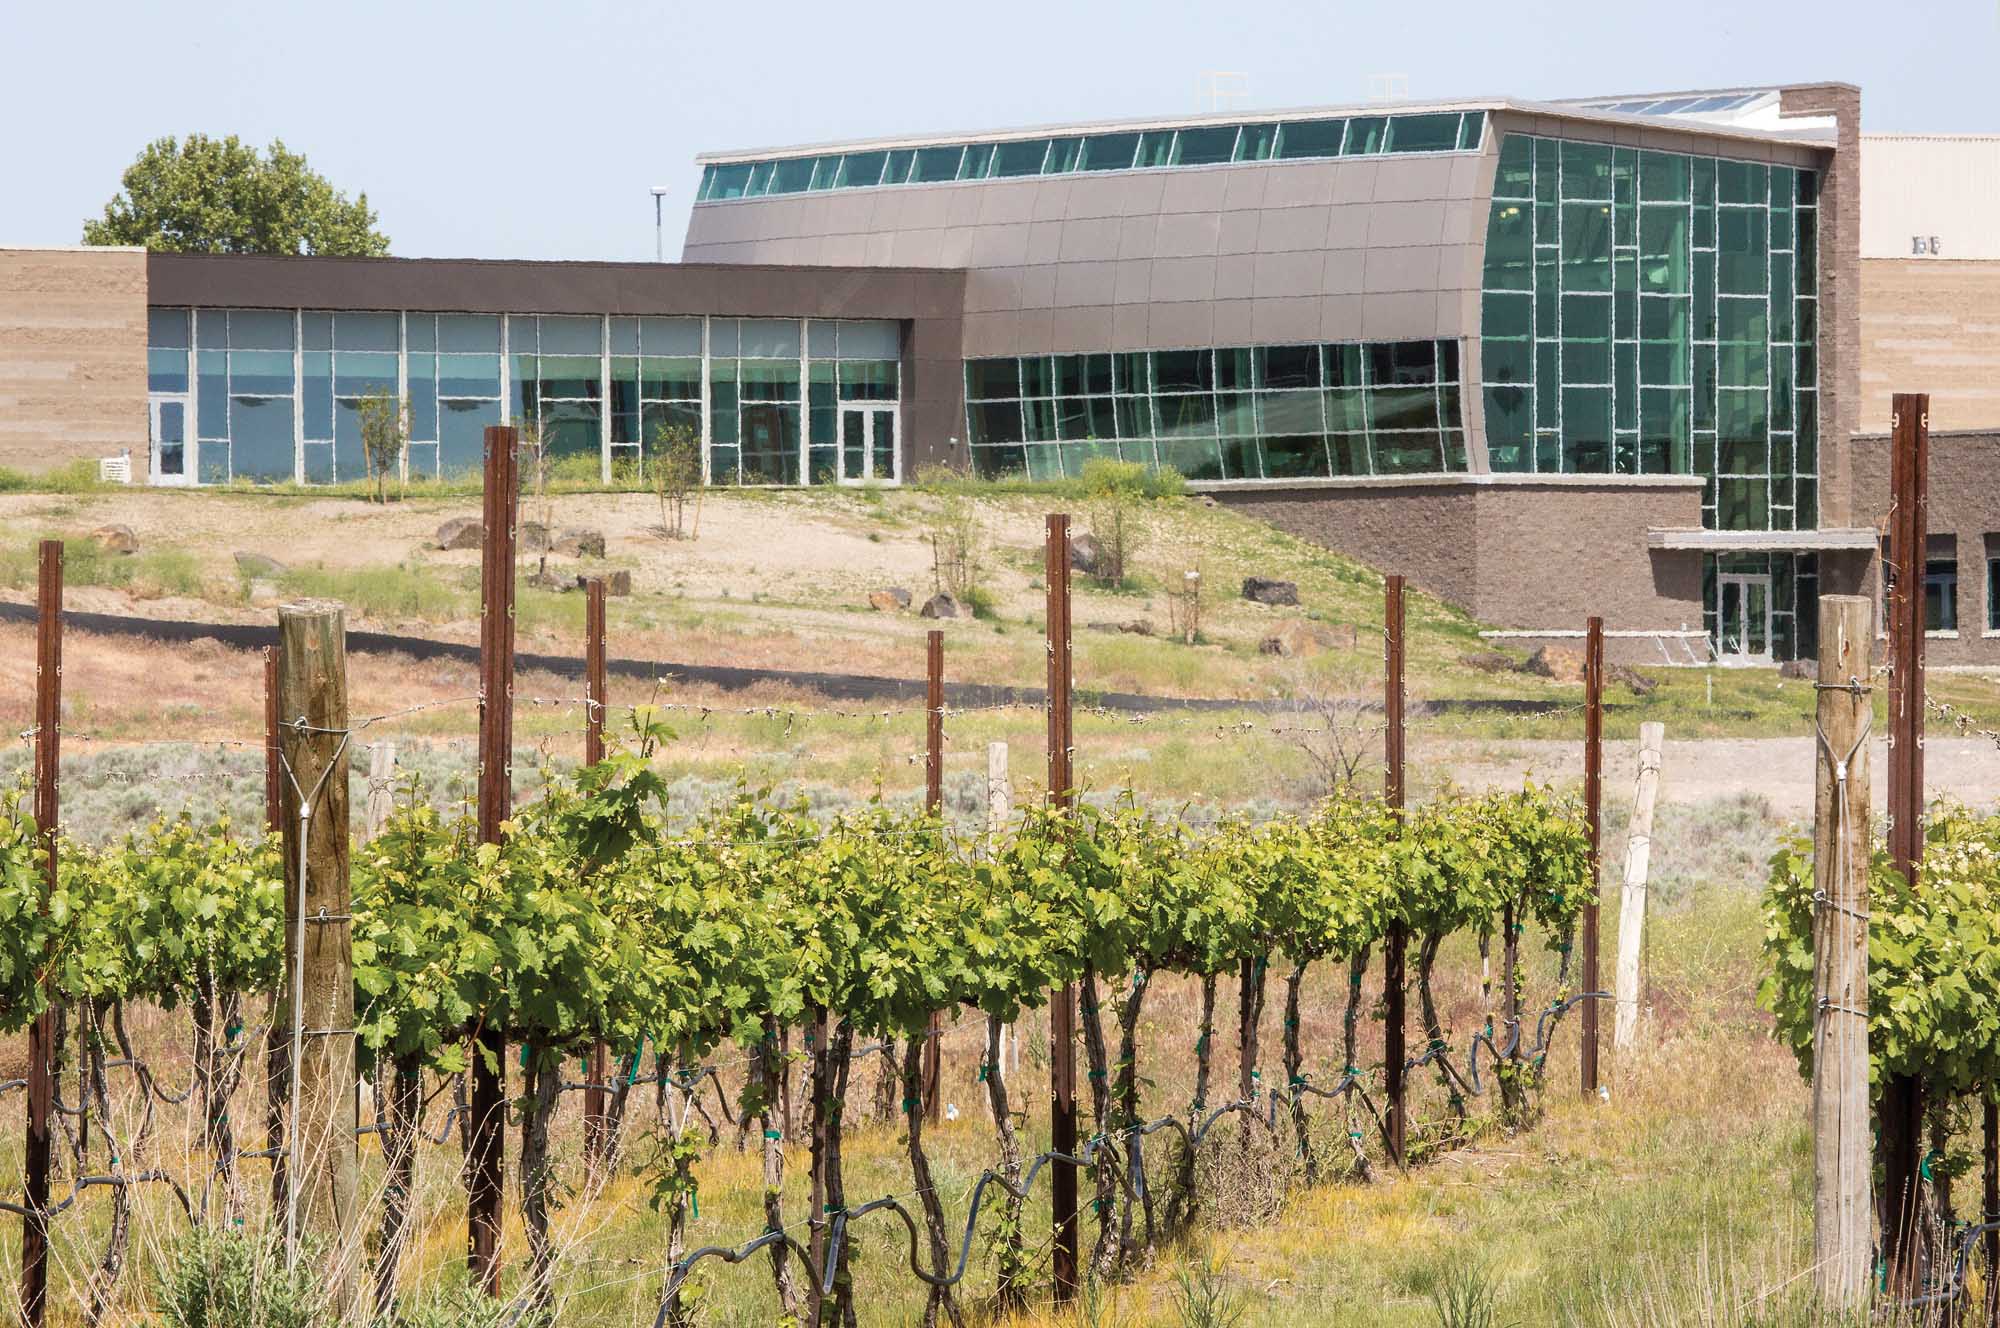 A small teaching vineyard, on the south side of the Washington State University Wine Science Center, helps students learn hands-on techniques, like pruning. (TJ Mullinax/Good Fruit Grower)